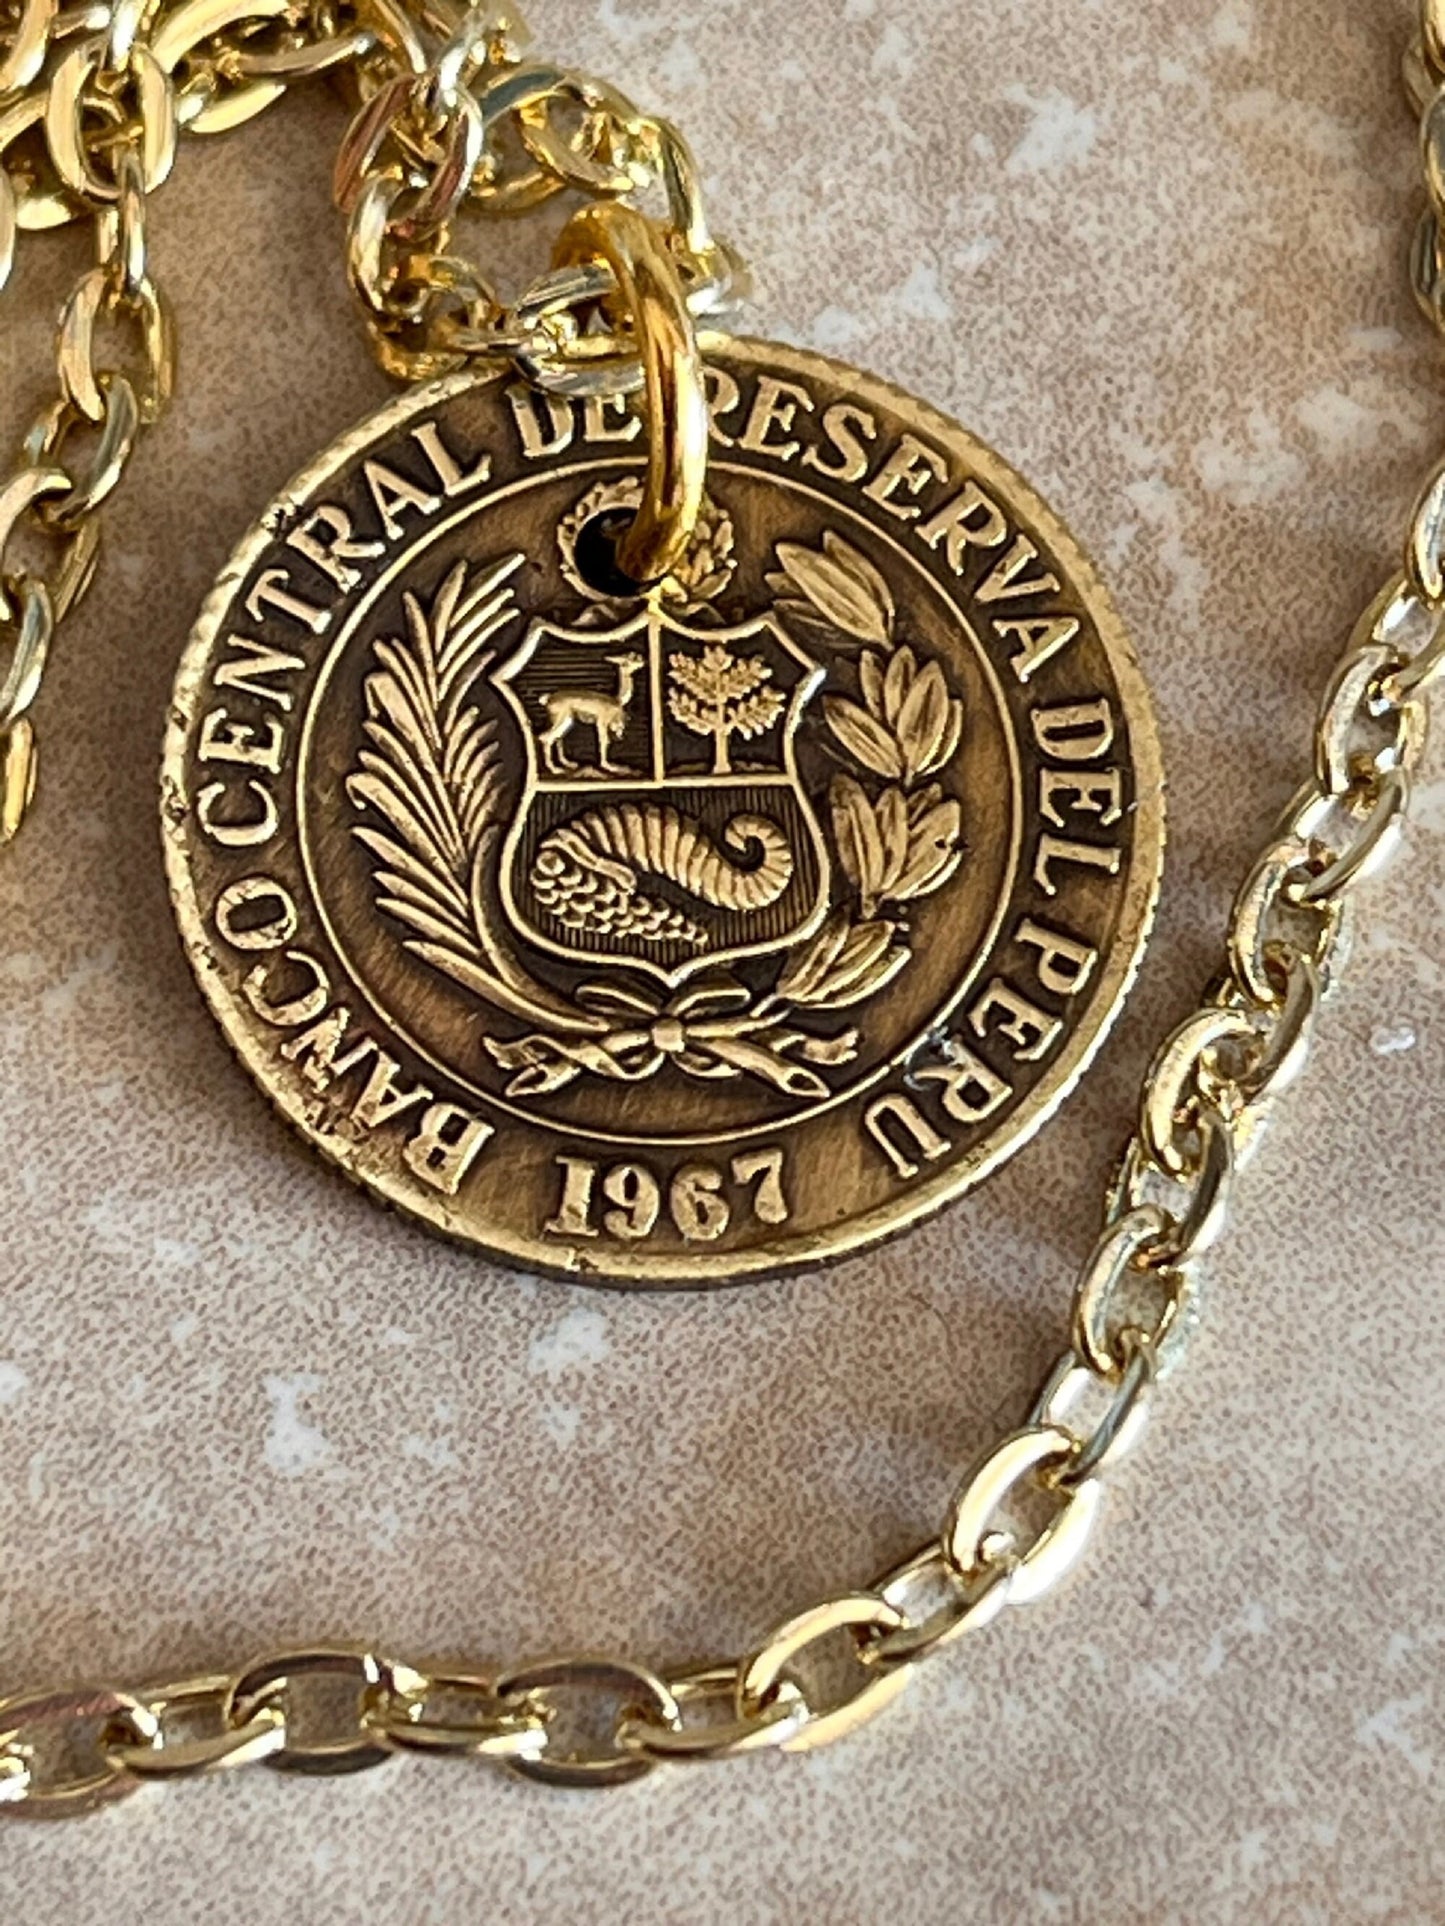 Peru Coin Pendant Peruvian 25 Centavos Personal Necklace Old Vintage Handmade Jewelry Gift Friend Charm For Him Her World Coin Collector